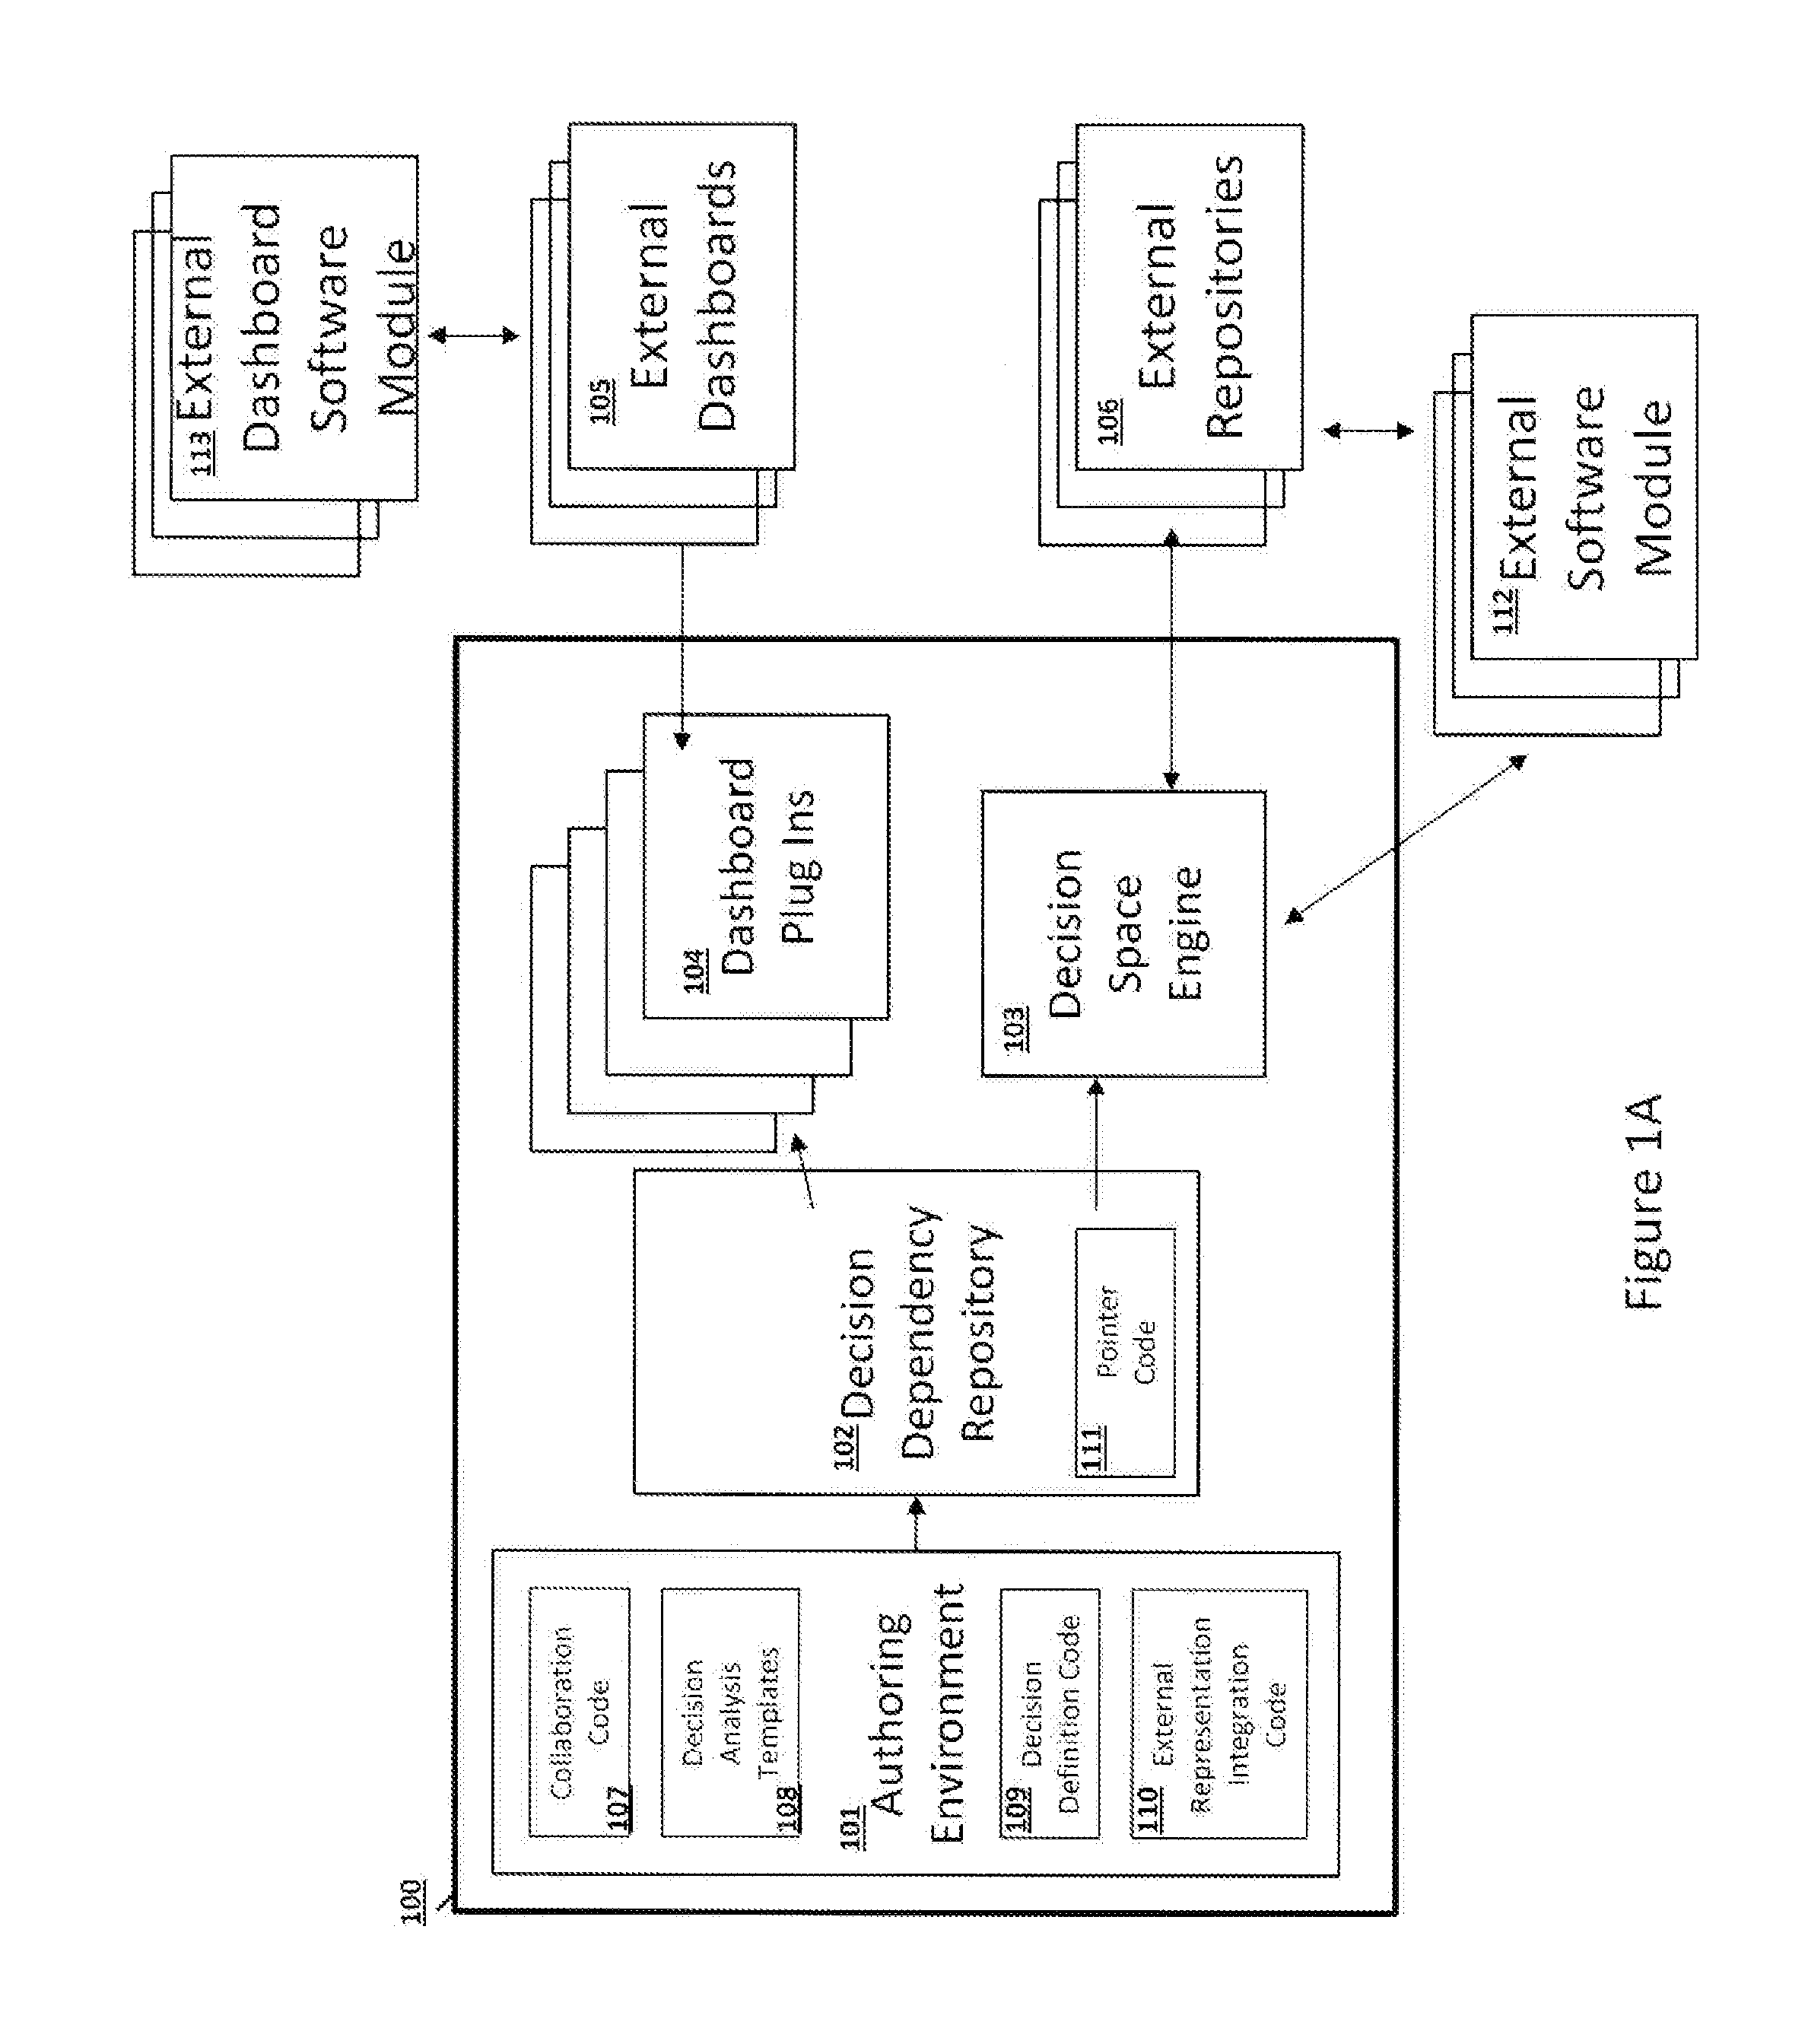 System and Method for Decision-Driven Business Performance Measurement